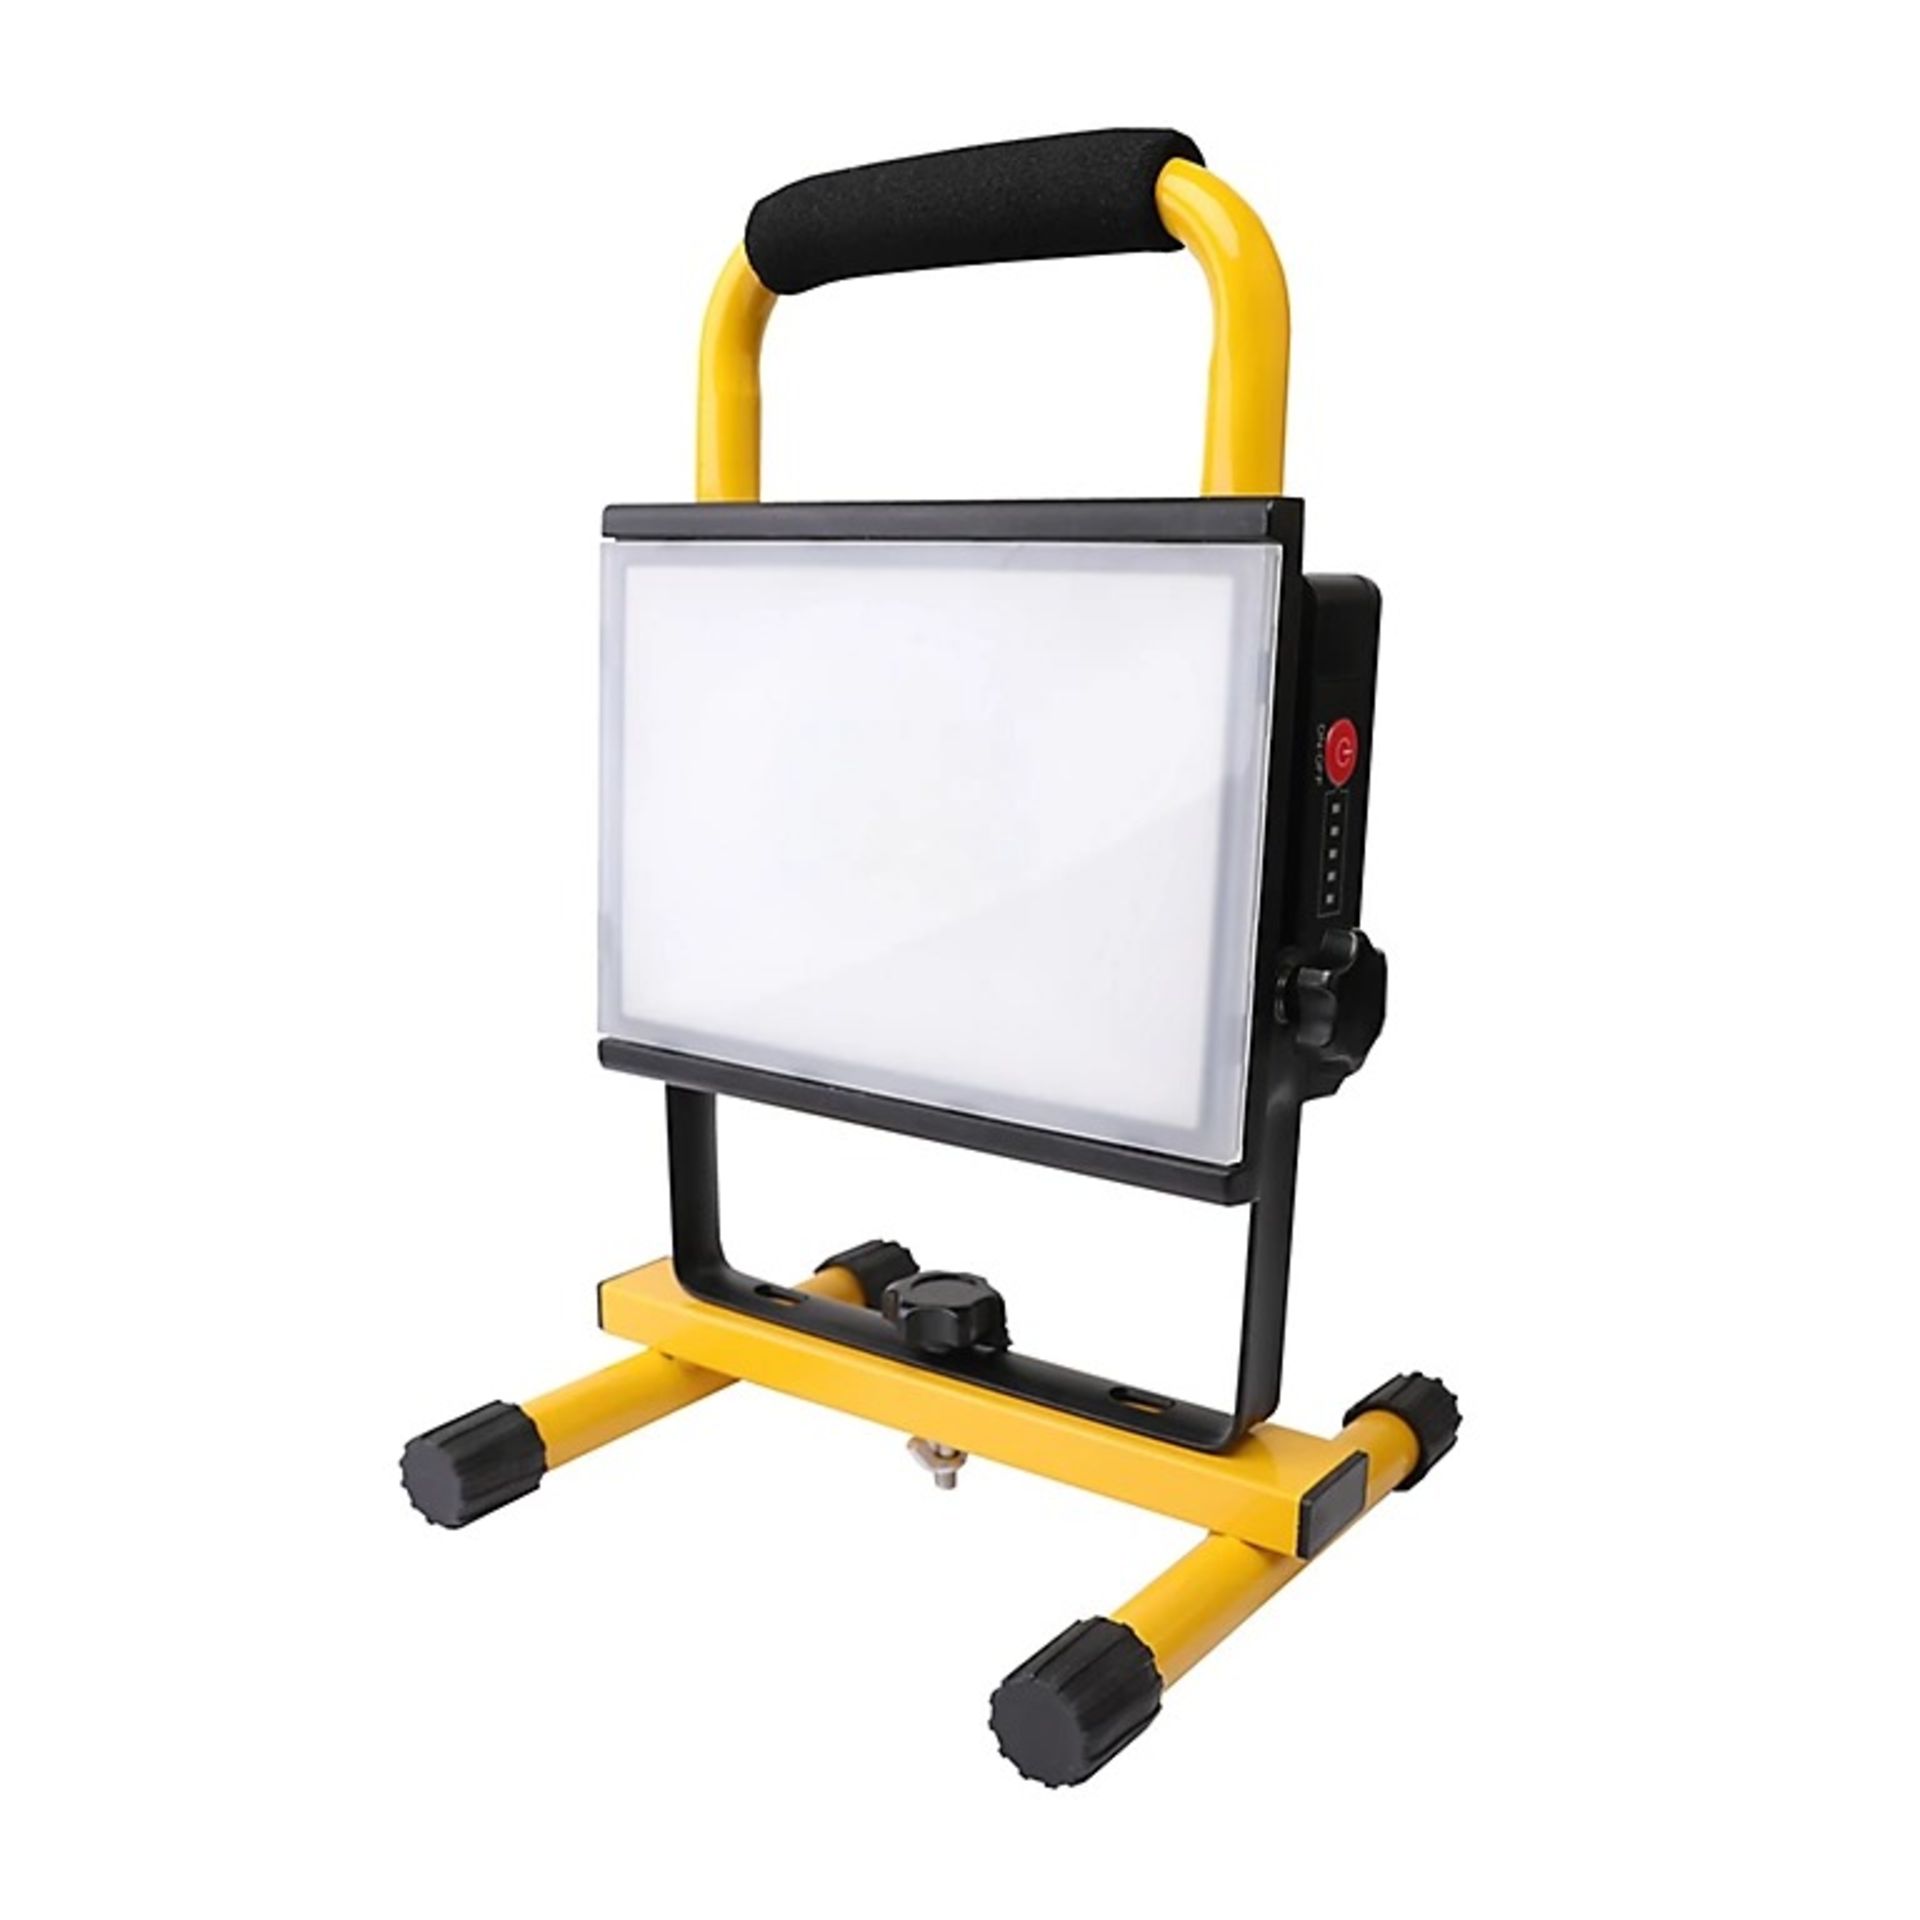 20W Rechargeable Work light, 2000lm - ER47